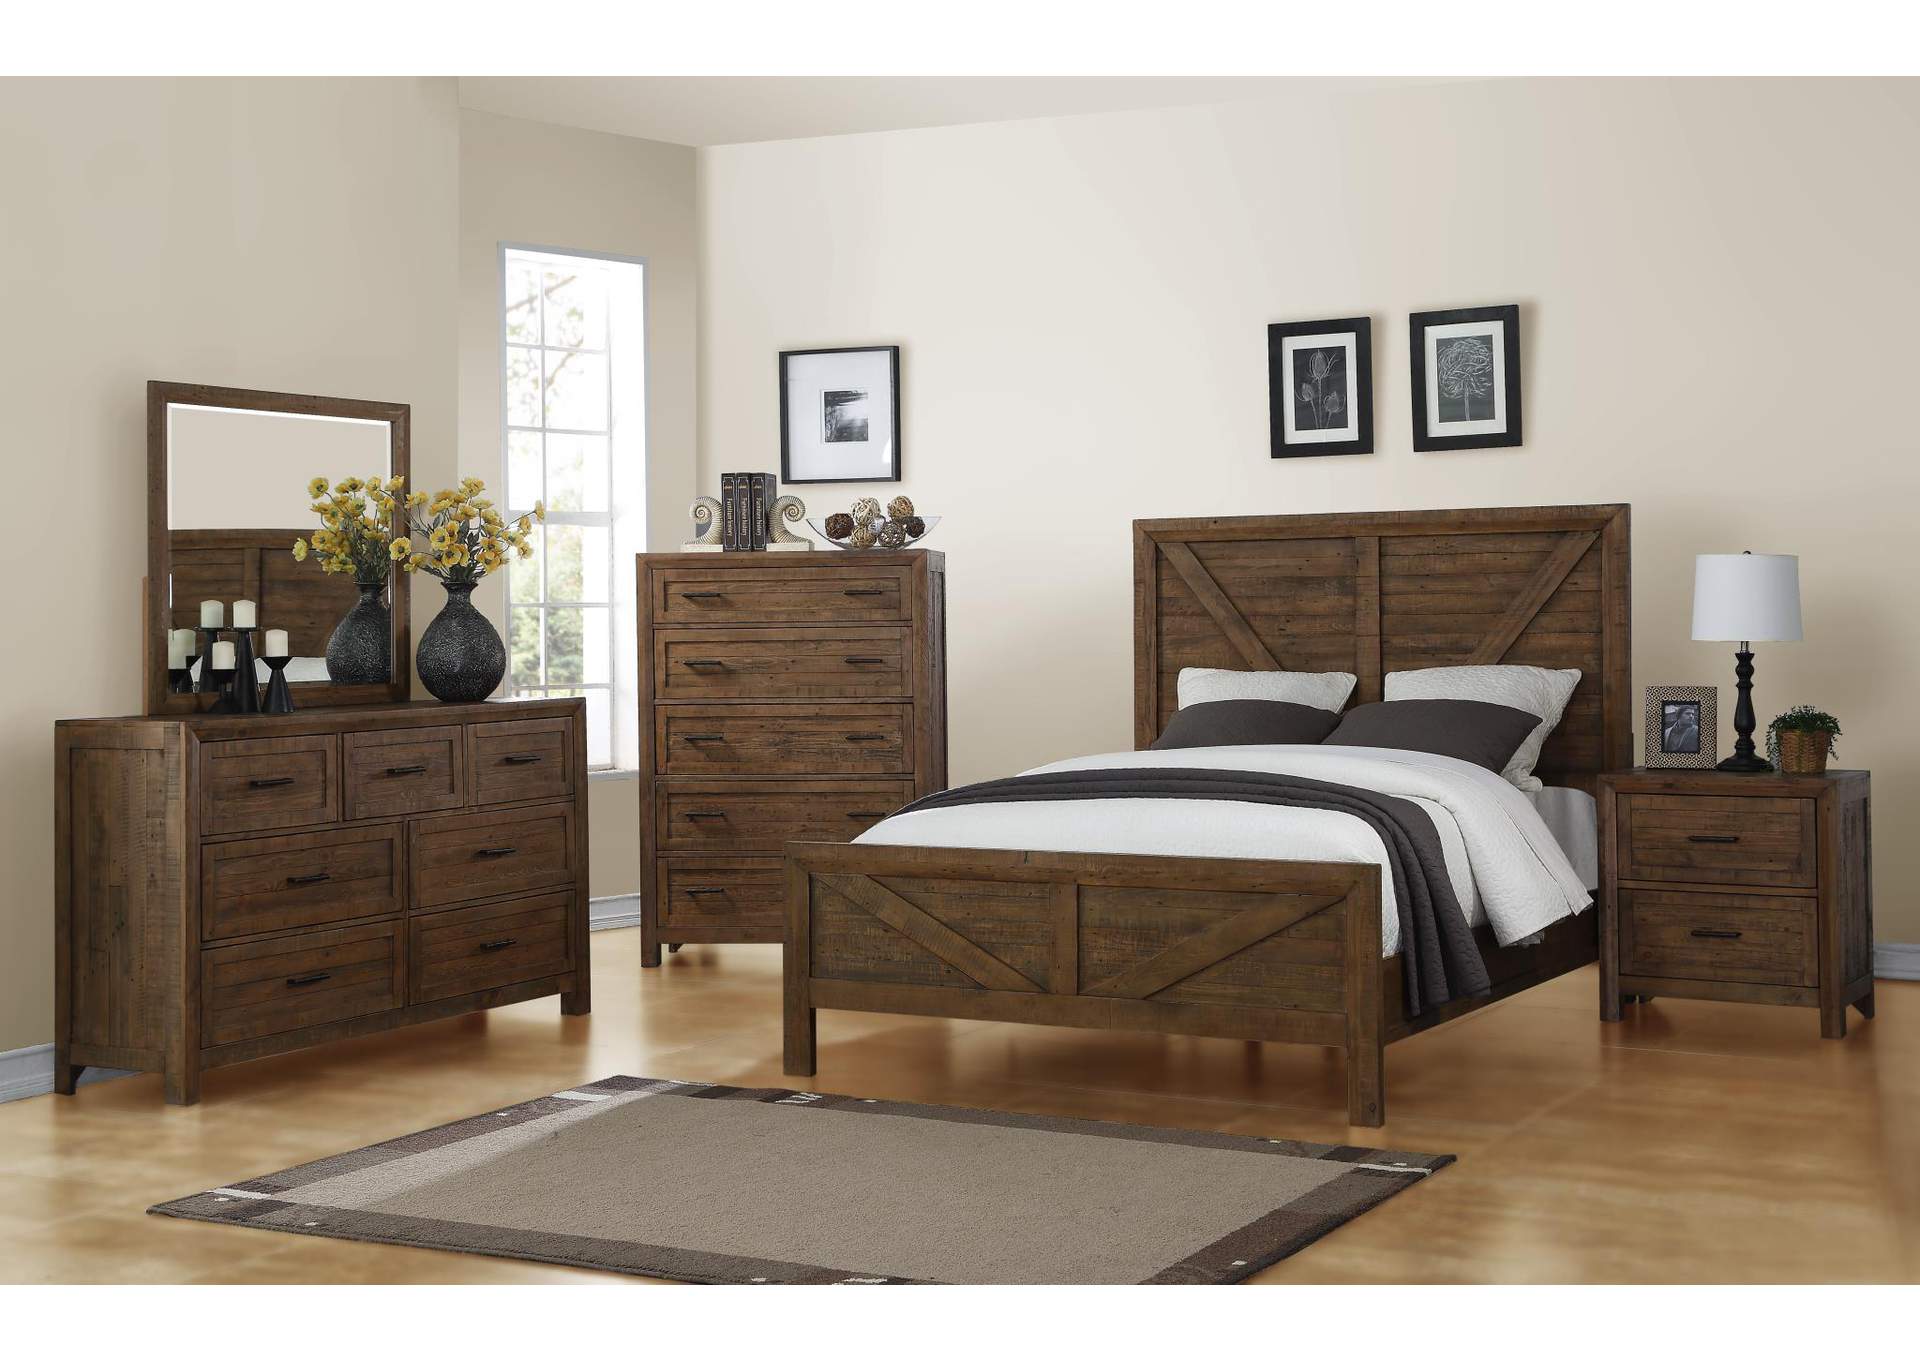 Pine Valley Drawer Chest,Emerald Home Furnishings